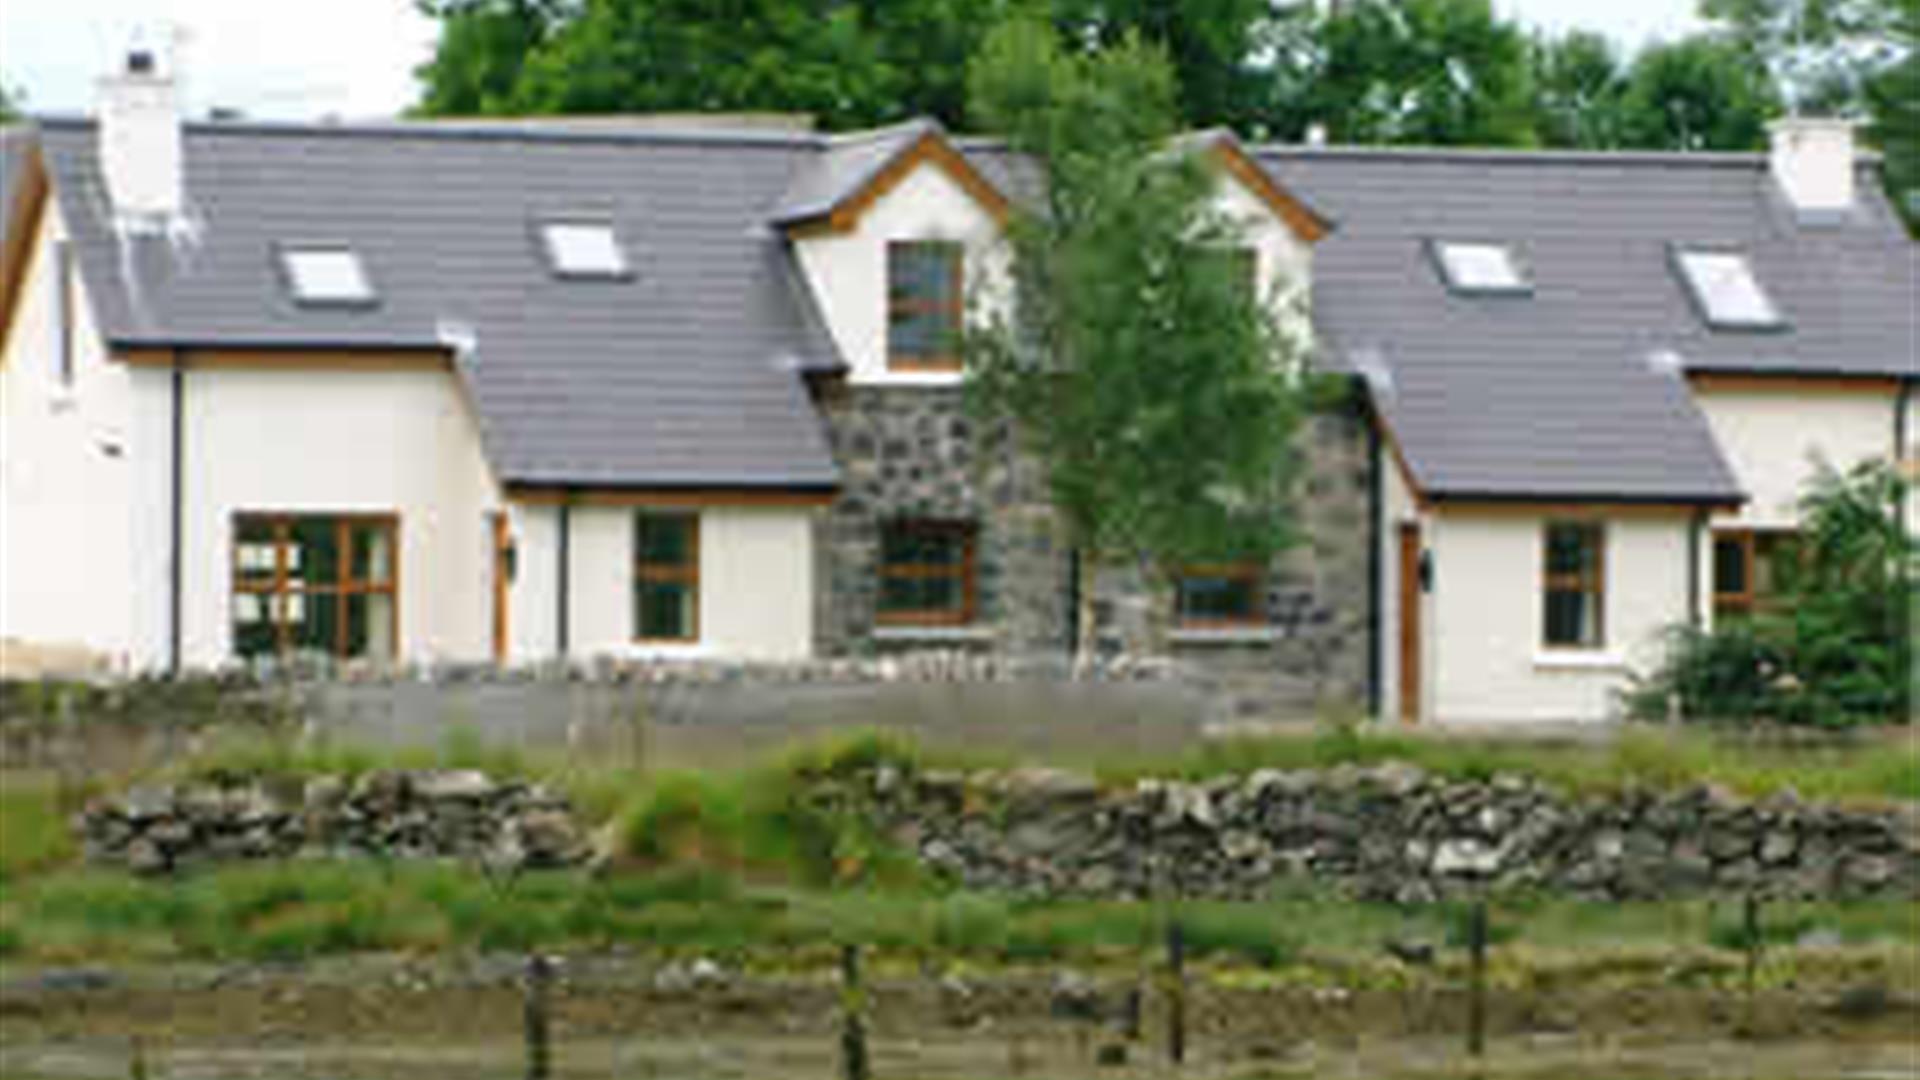 Photo of the accommodation from outside